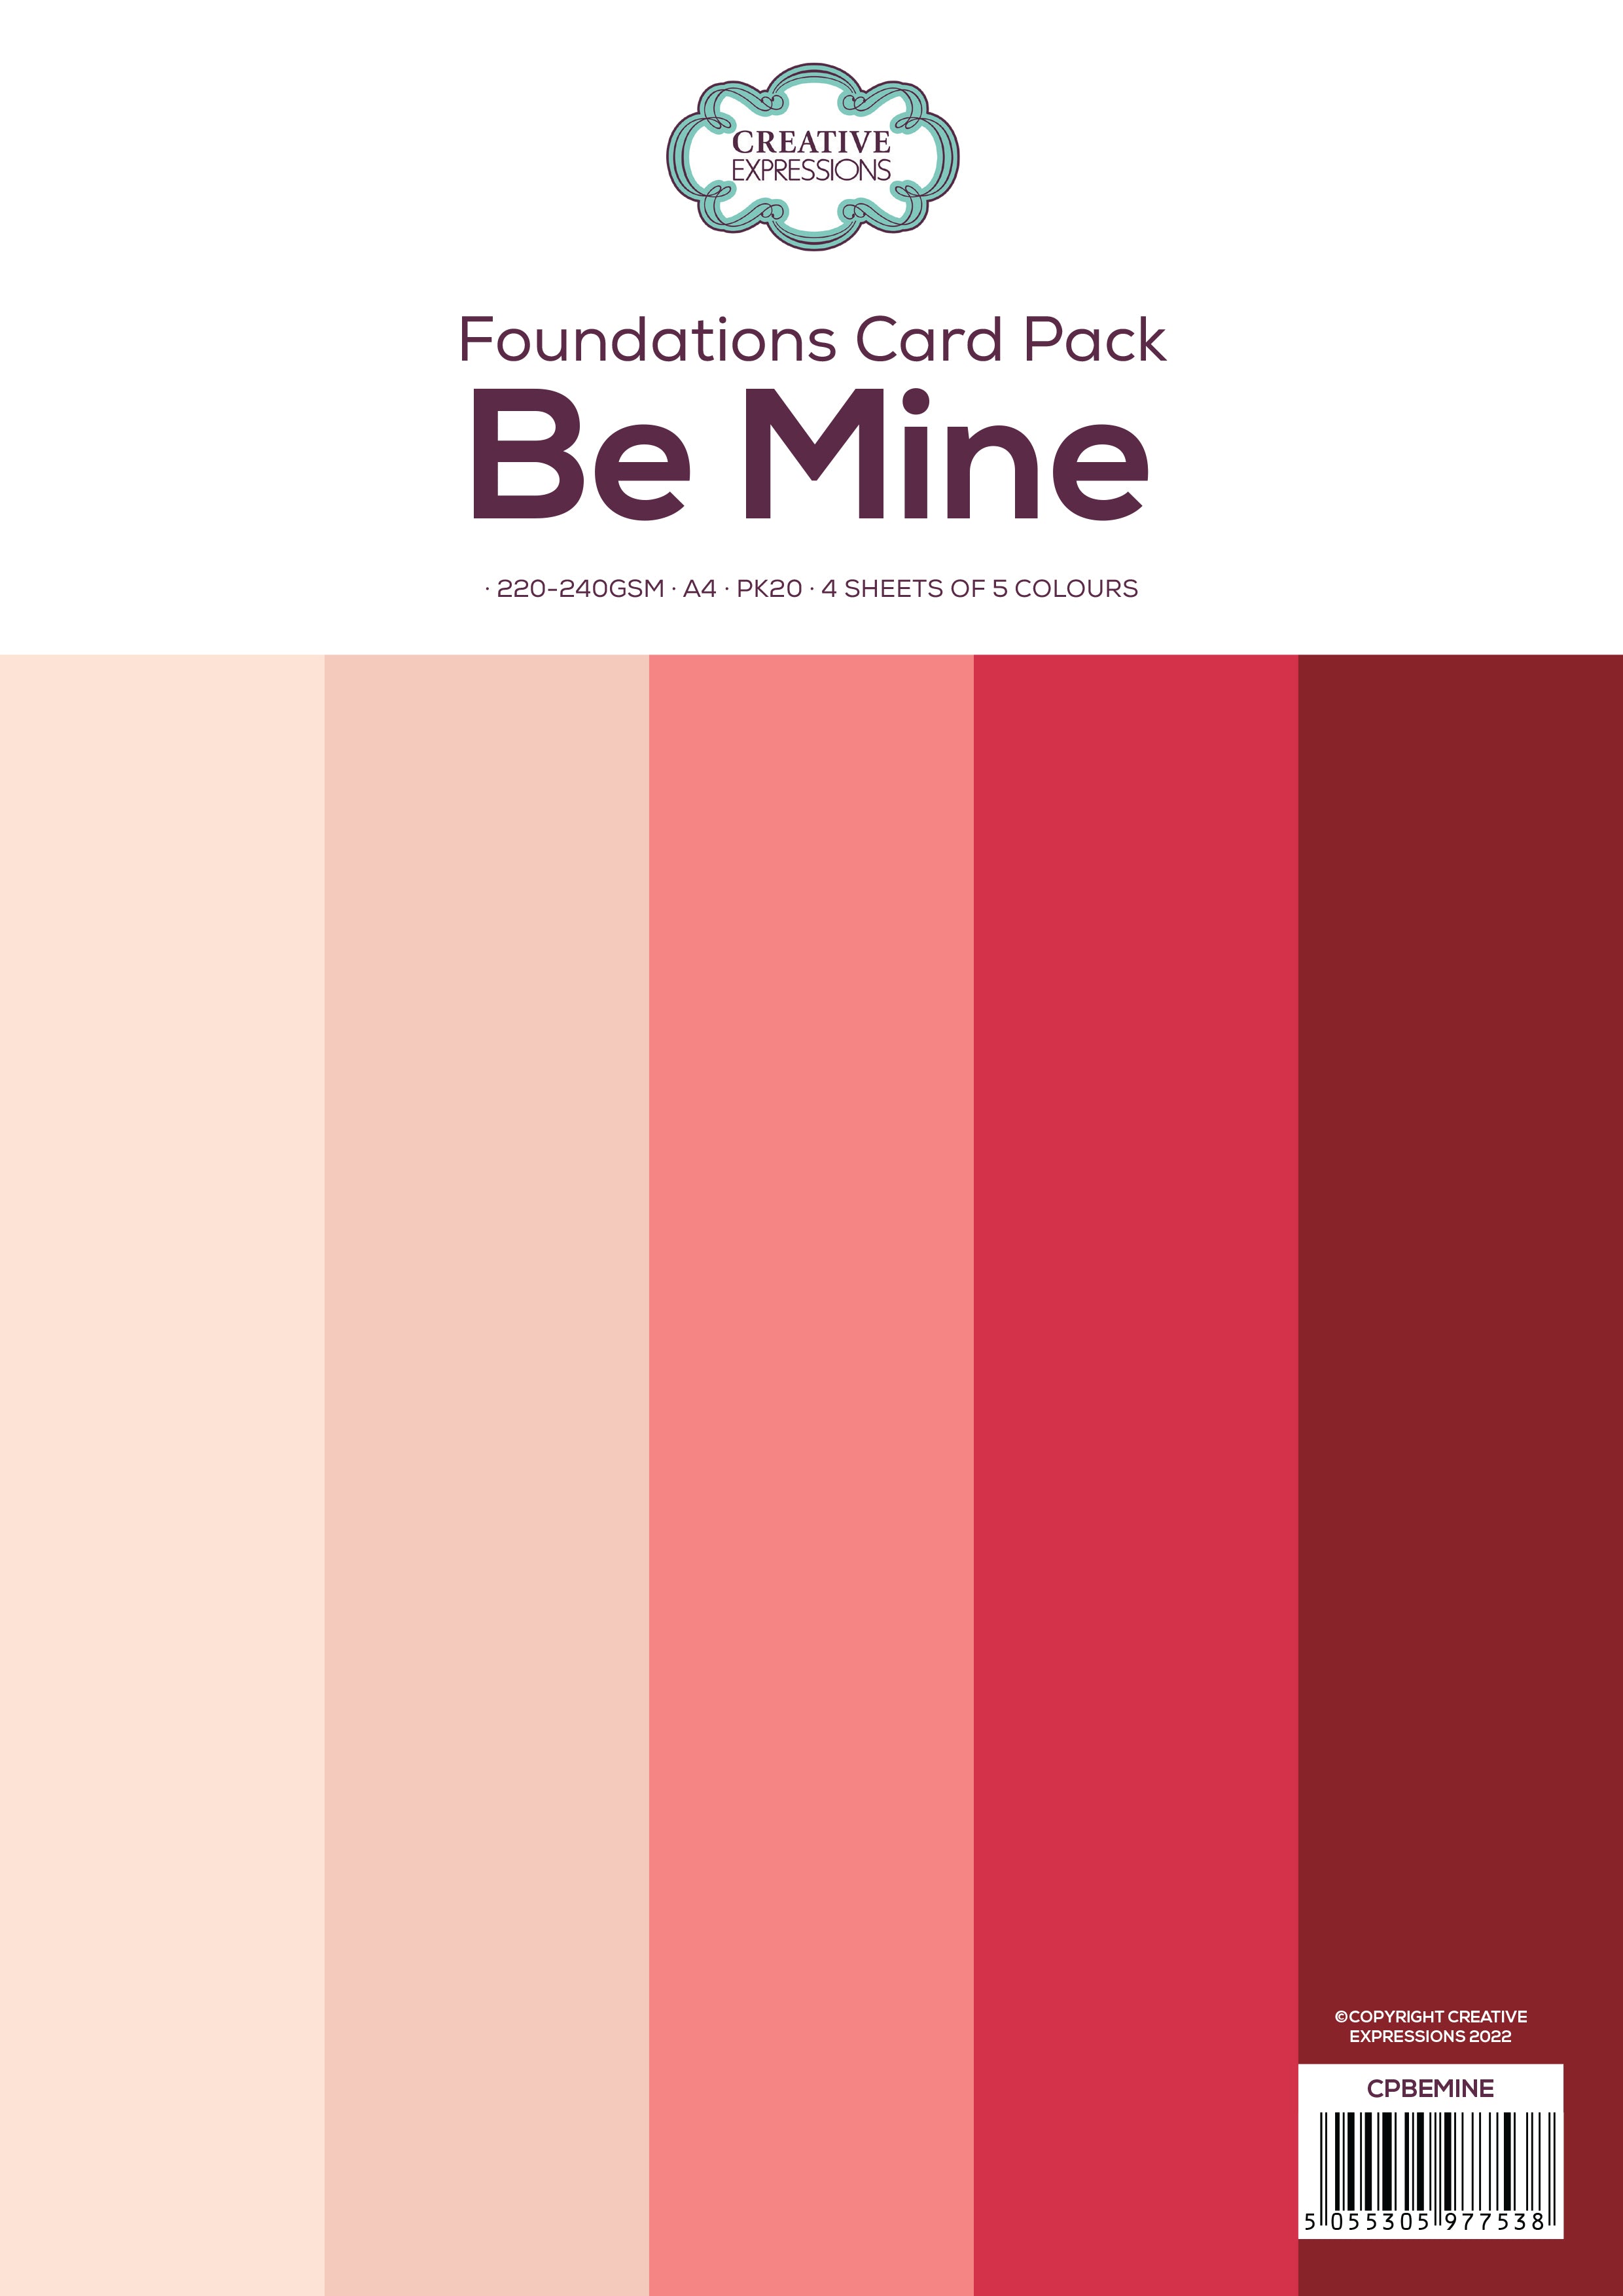 Creative Expressions Be Mine Paper Pack 220-240gsm A4 Pk20 4 Sheets Of 5 colours